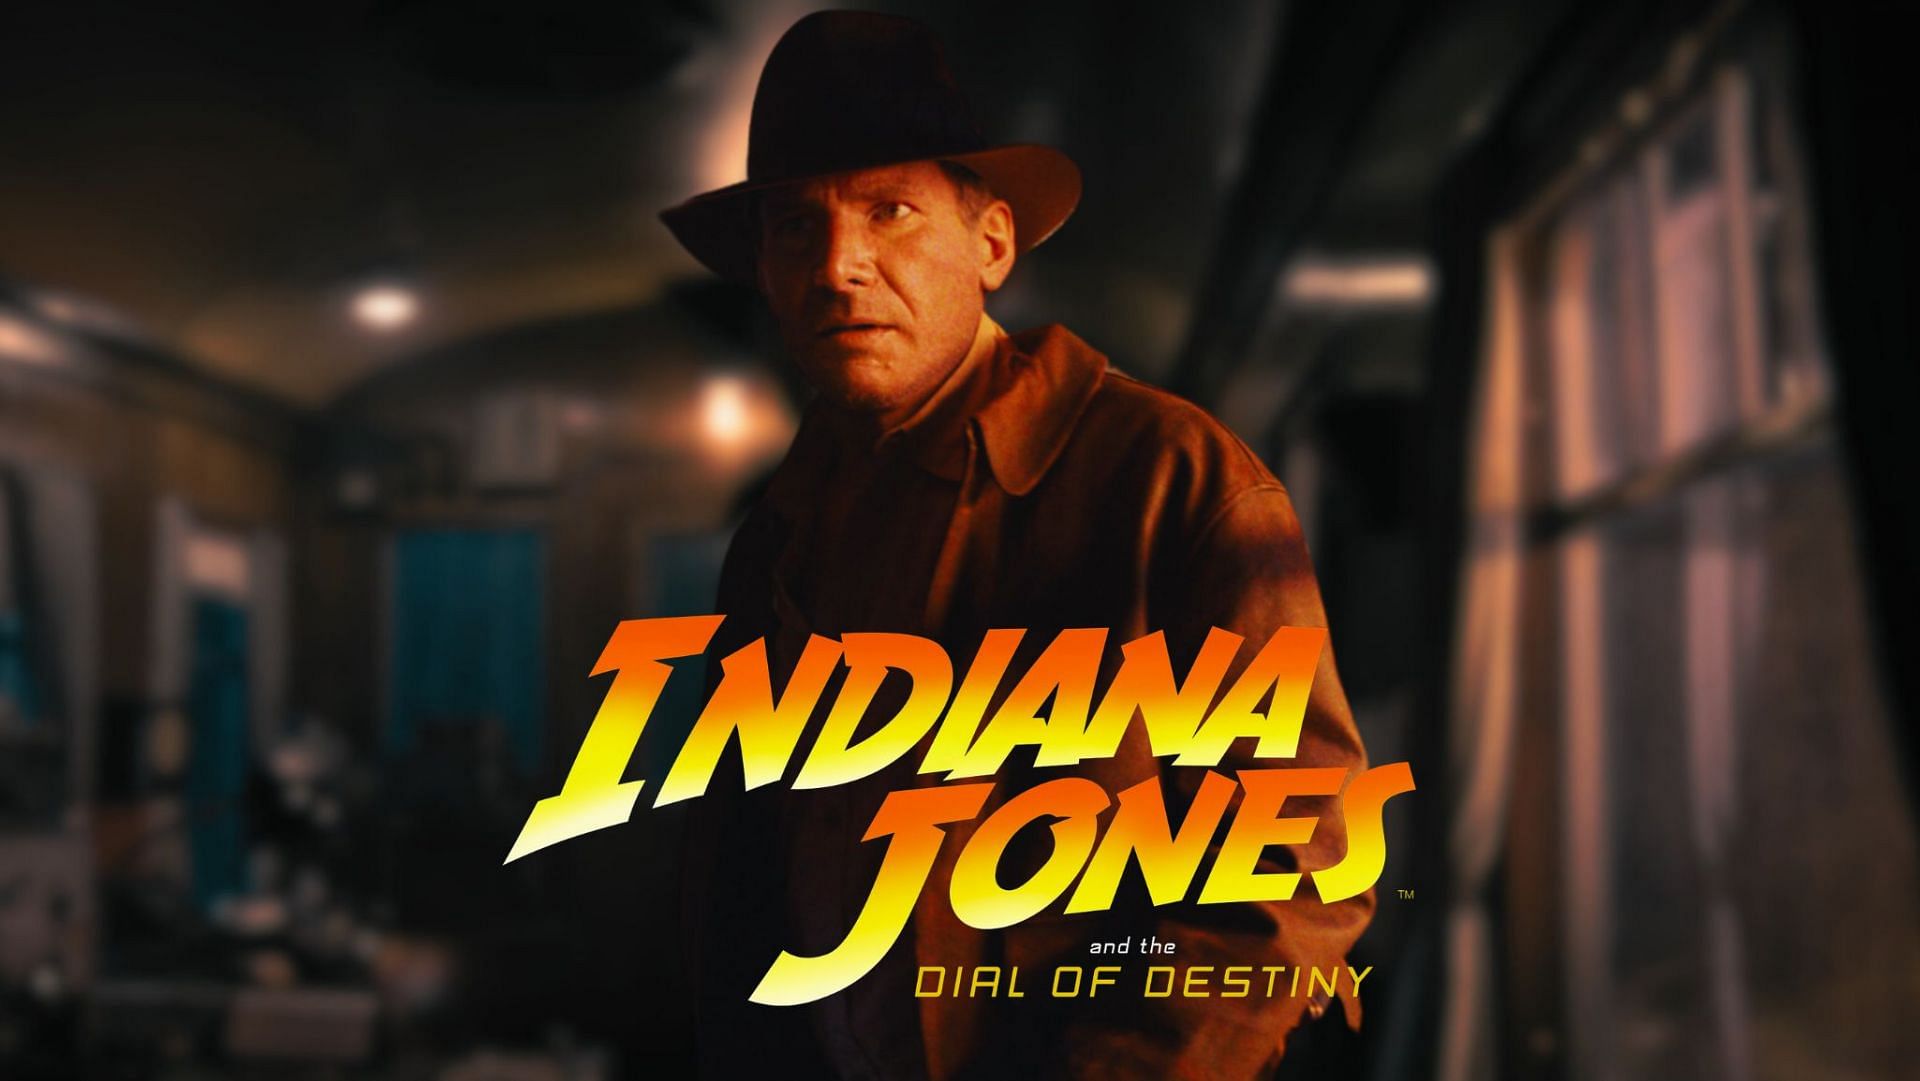 Indiana Jones 5 Review Rotten Tomatoes